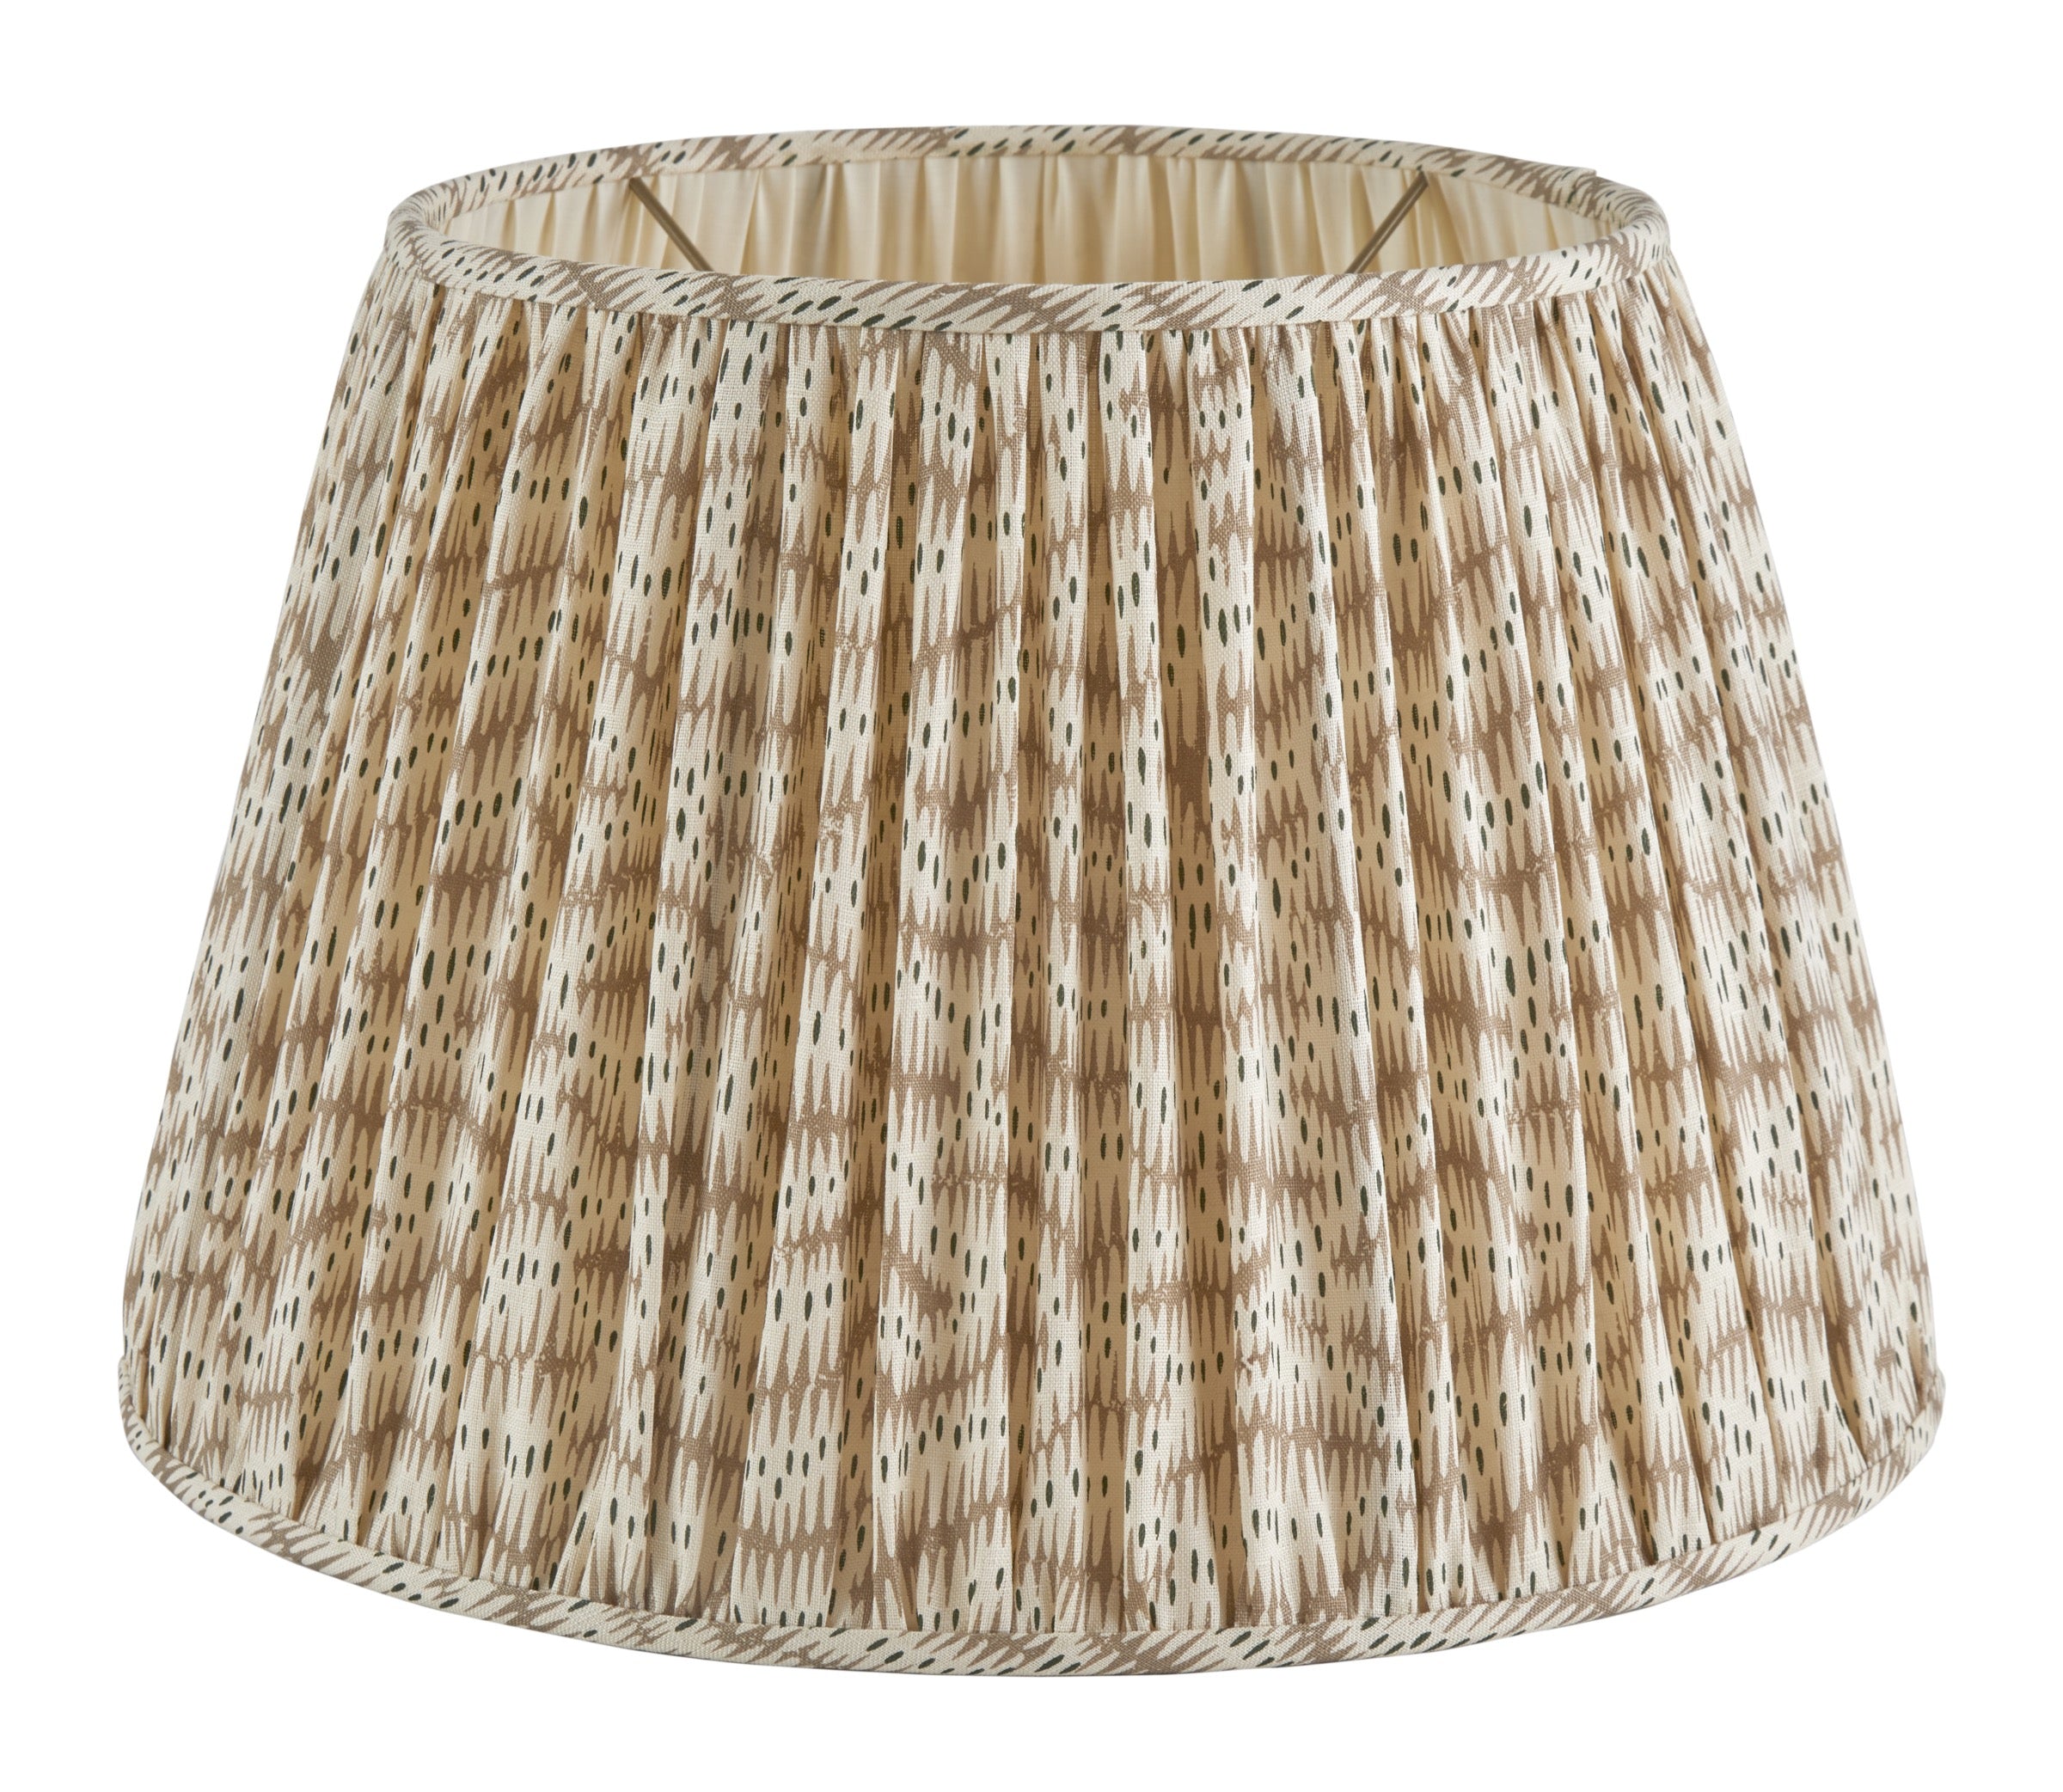 Daphne's Feathers Bronze Lampshade